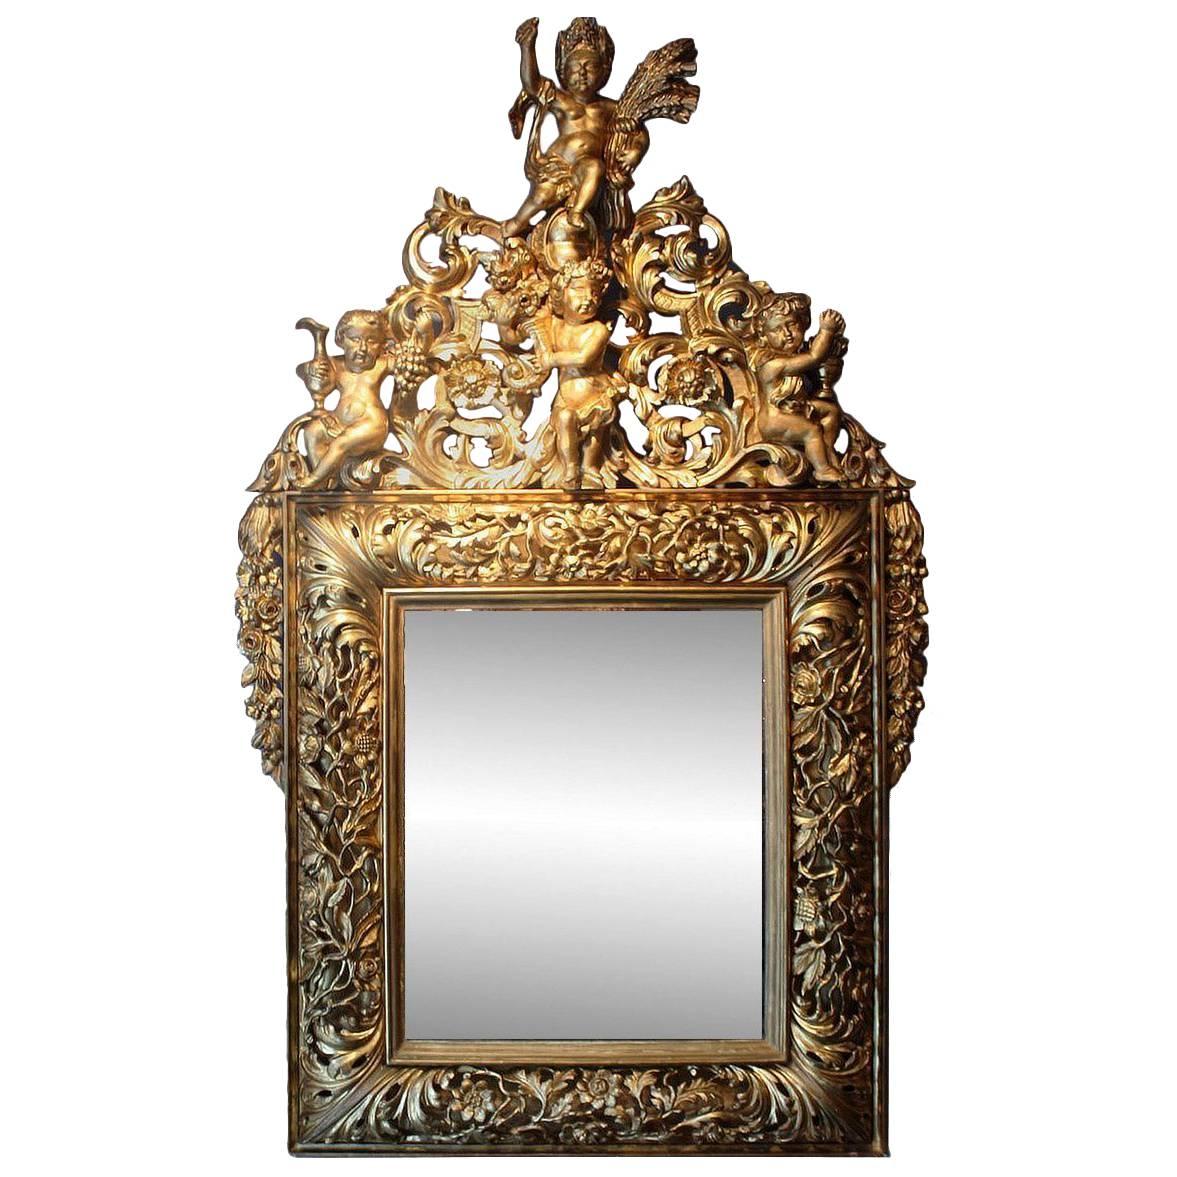 18th Century Italian Carved Open-Work Giltwood Mirror Depicting the Four Seasons For Sale